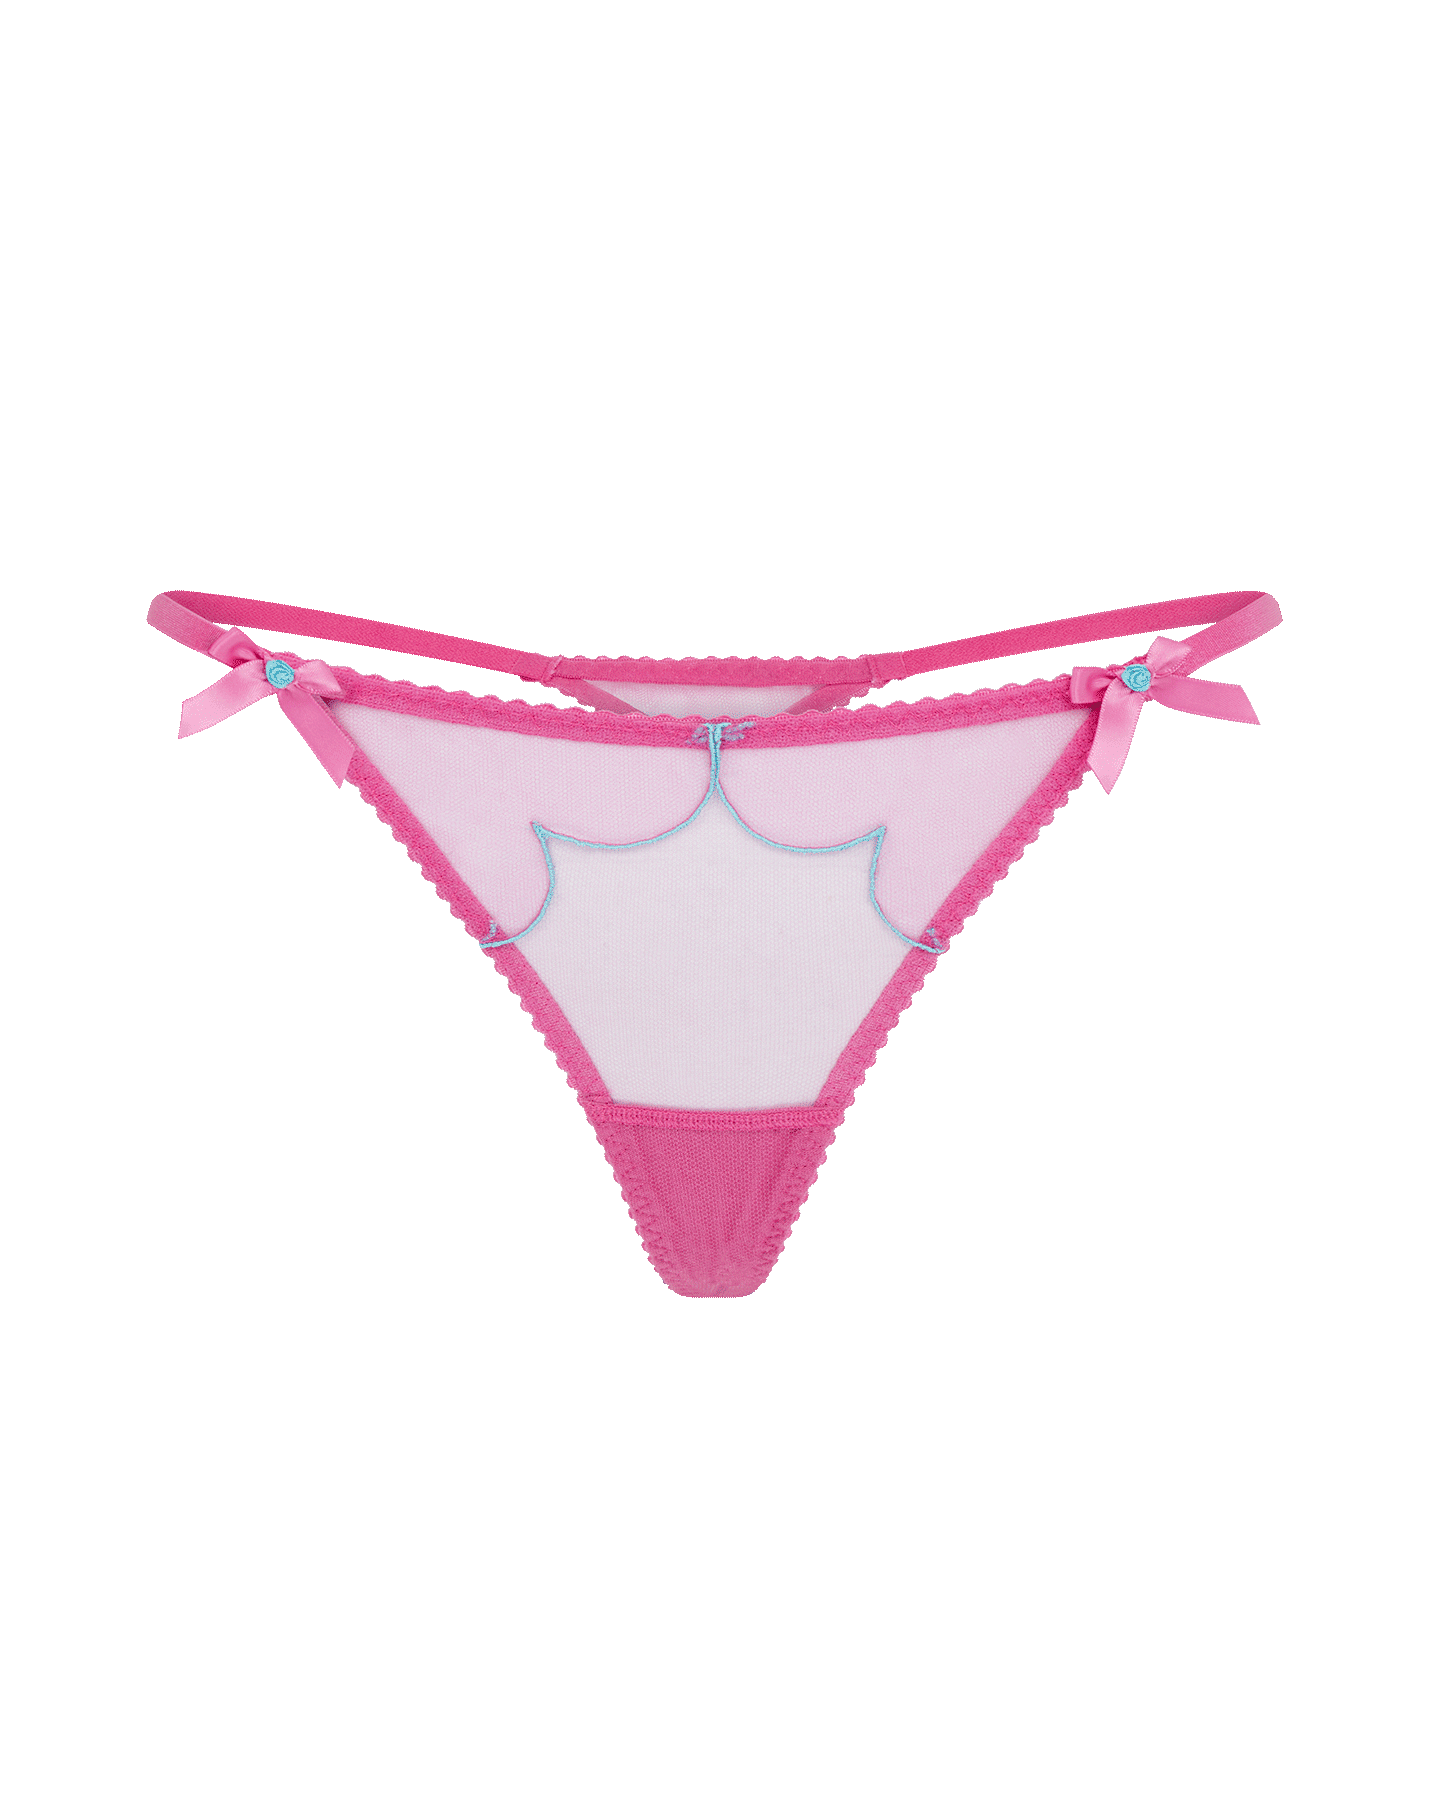 Lorna Thong in Hot Pink/Turquoise | By Agent Provocateur Outlet